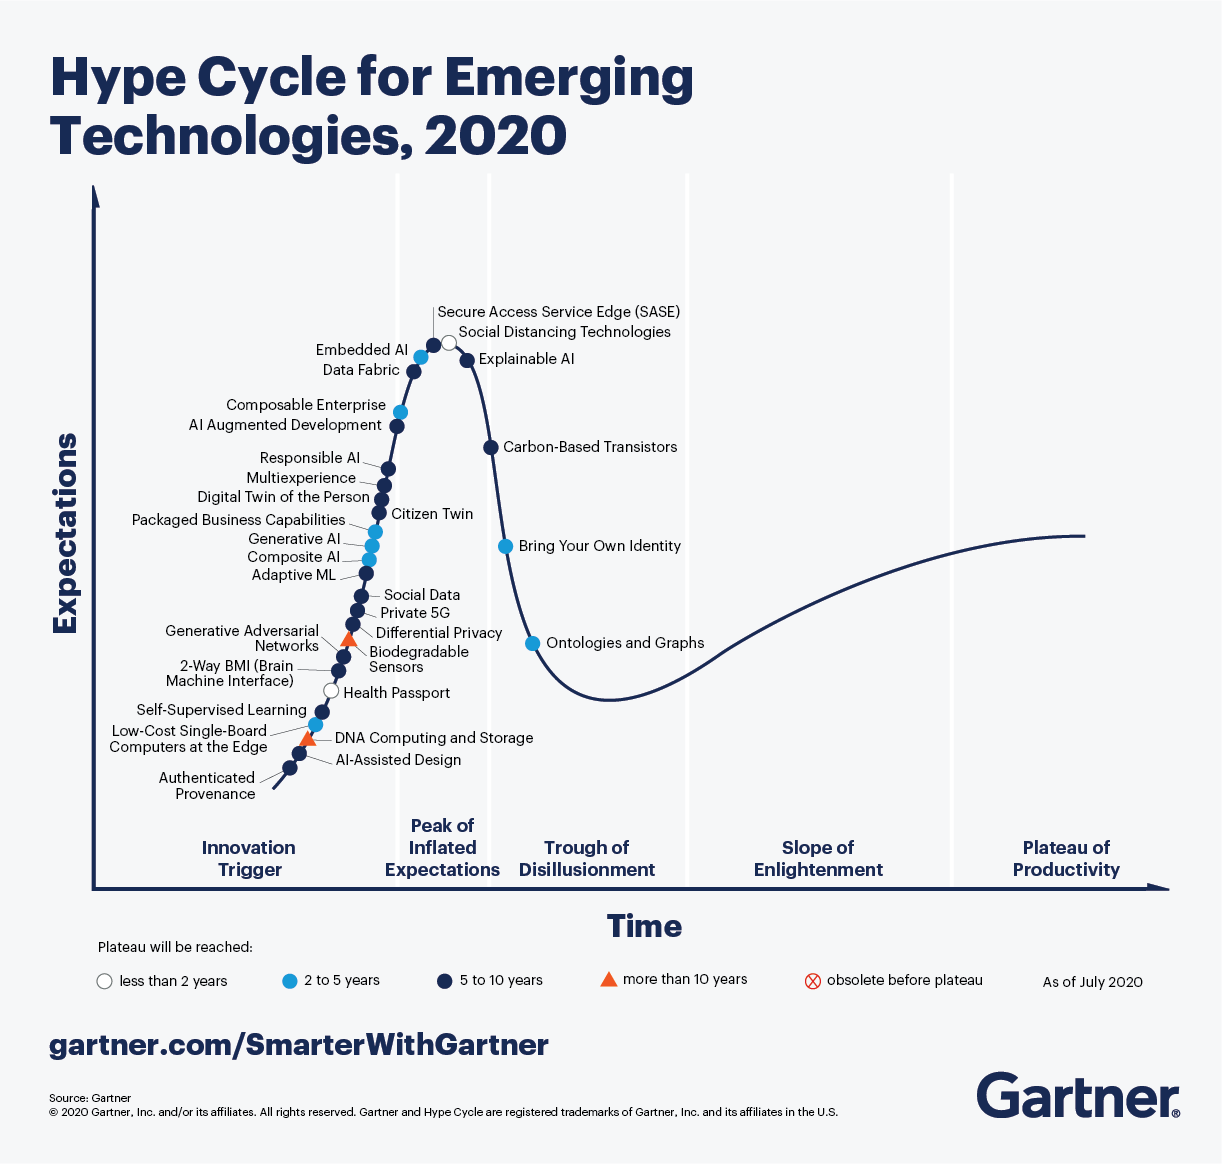 Hype Cycle for Emerging Technologies 2020